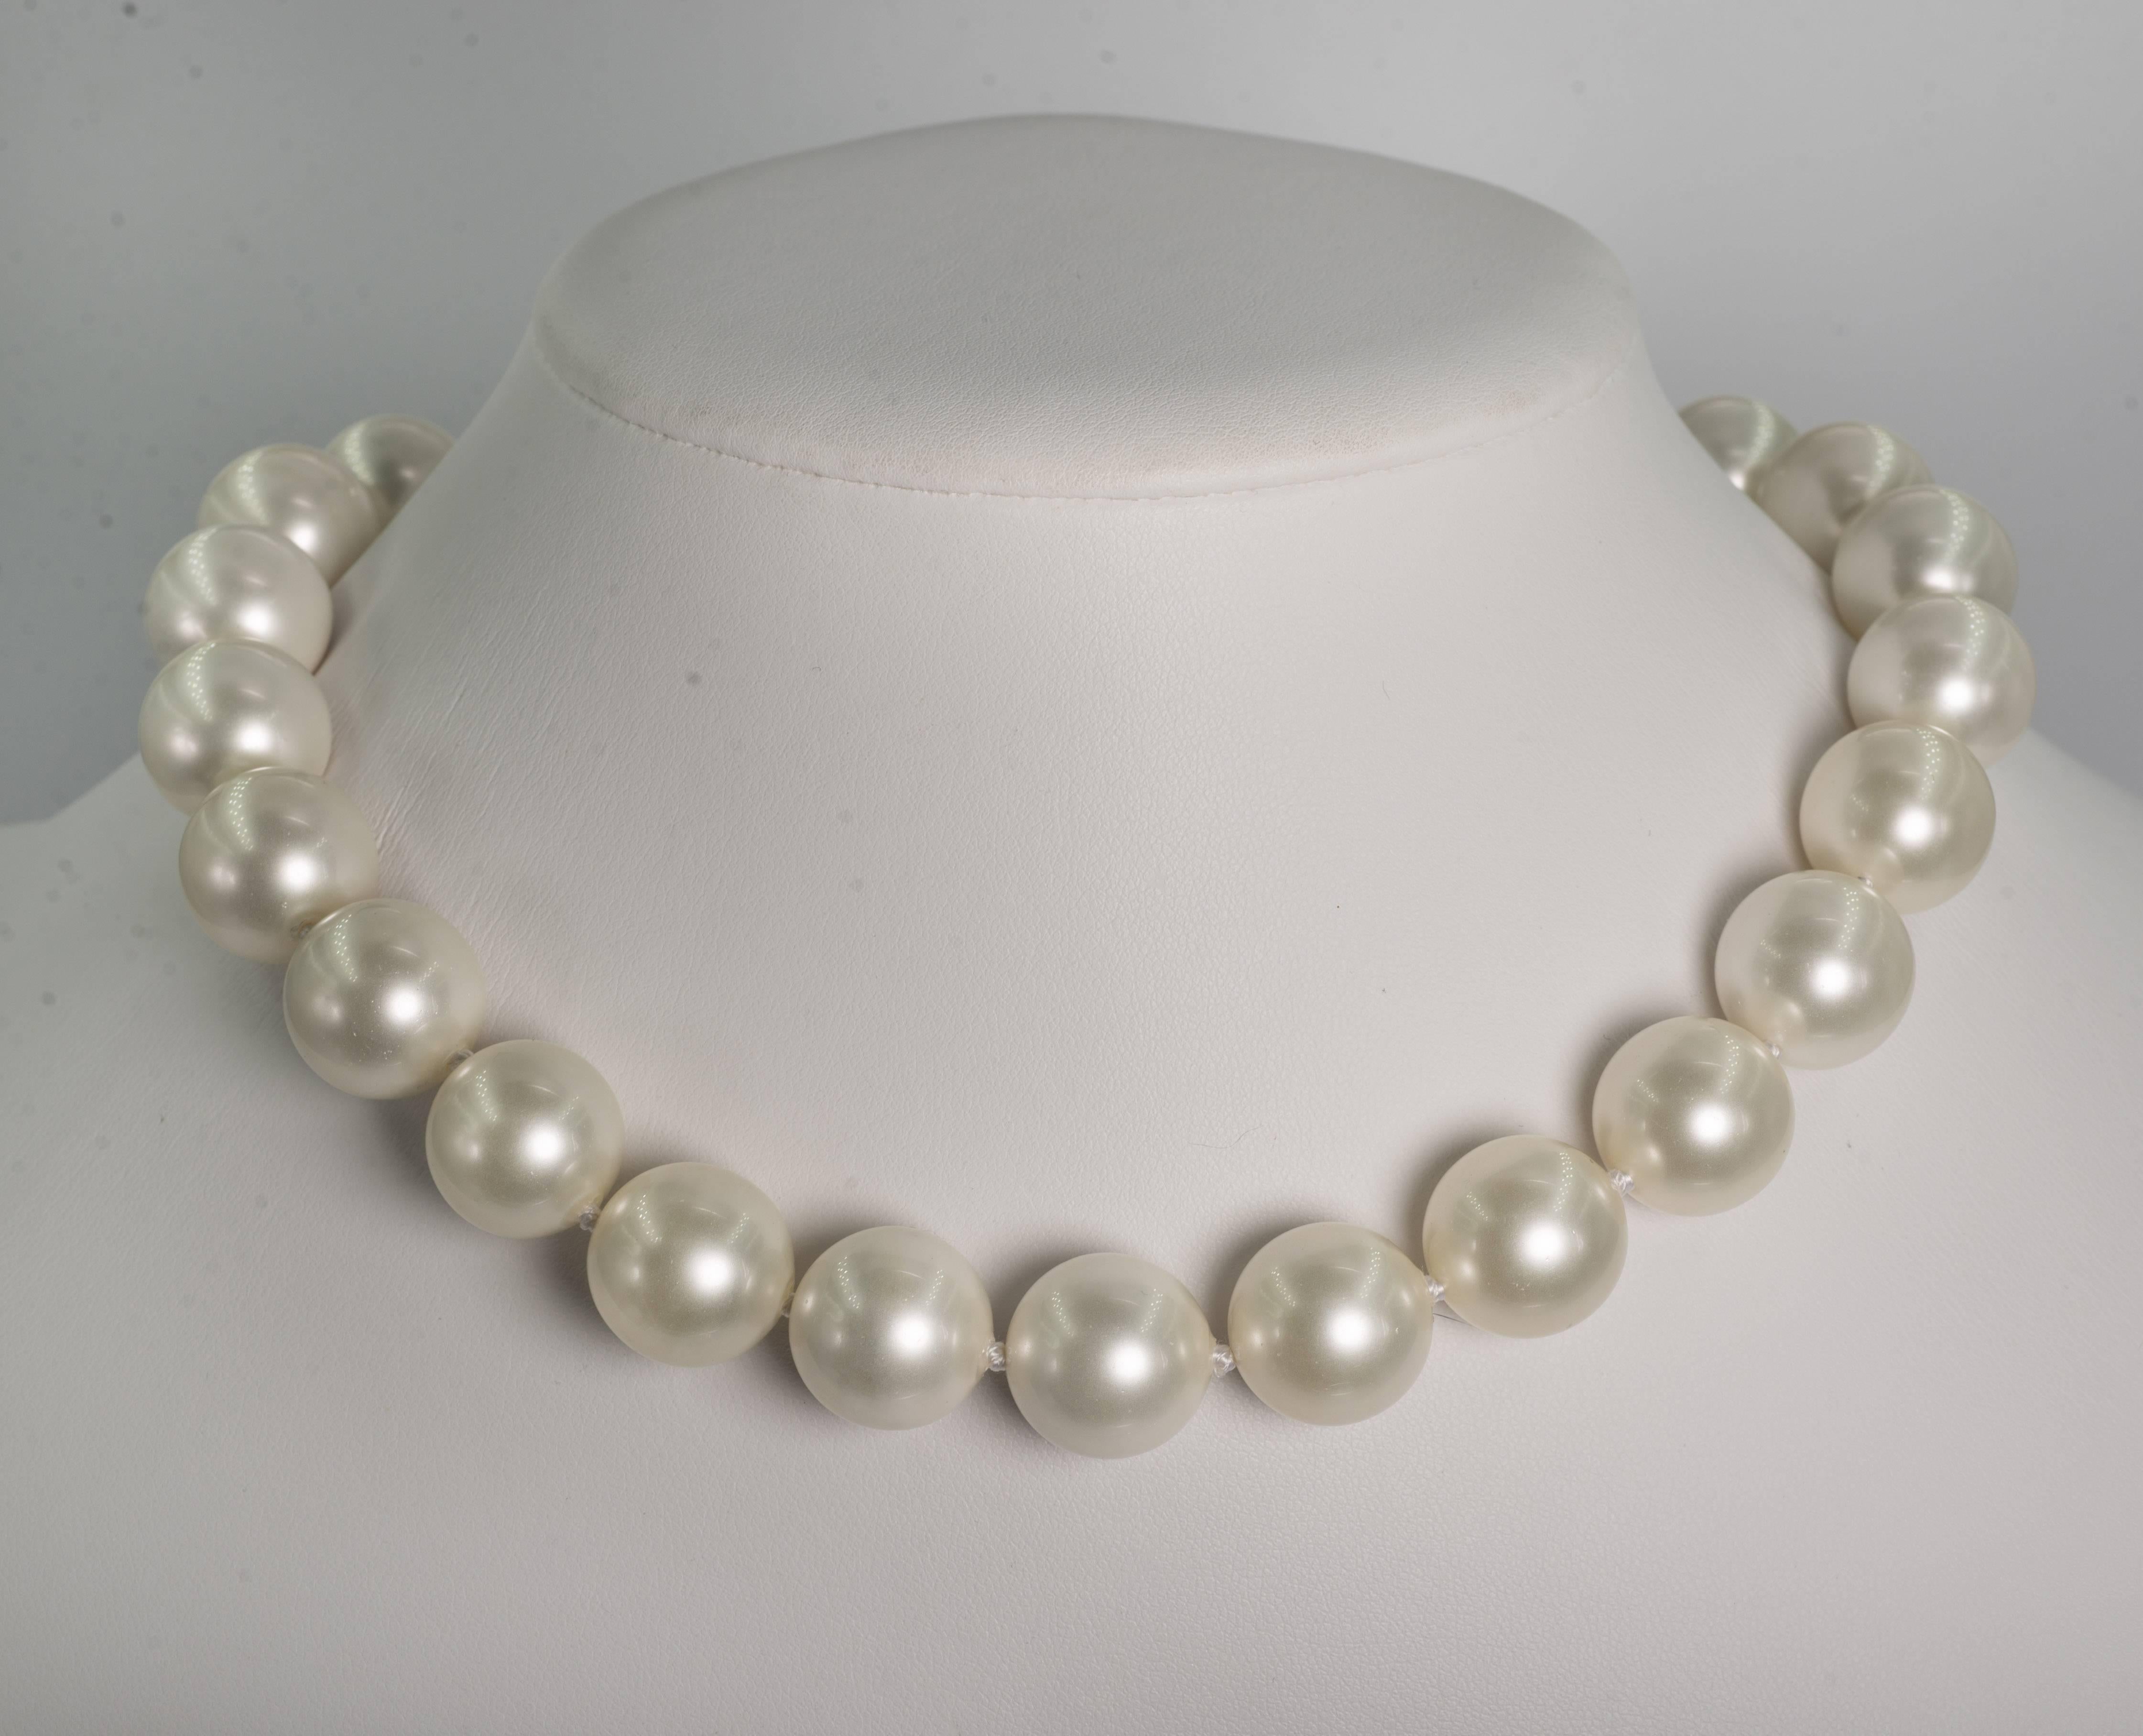 Faux 16mm South Sea Pearl Necklace measuring 18'' to a pave cubic zirconia clasp. The pearls are made of mother of pearl and have a wonderful luminescent pearl coating. Freshly hand strung knotted with silk threads.